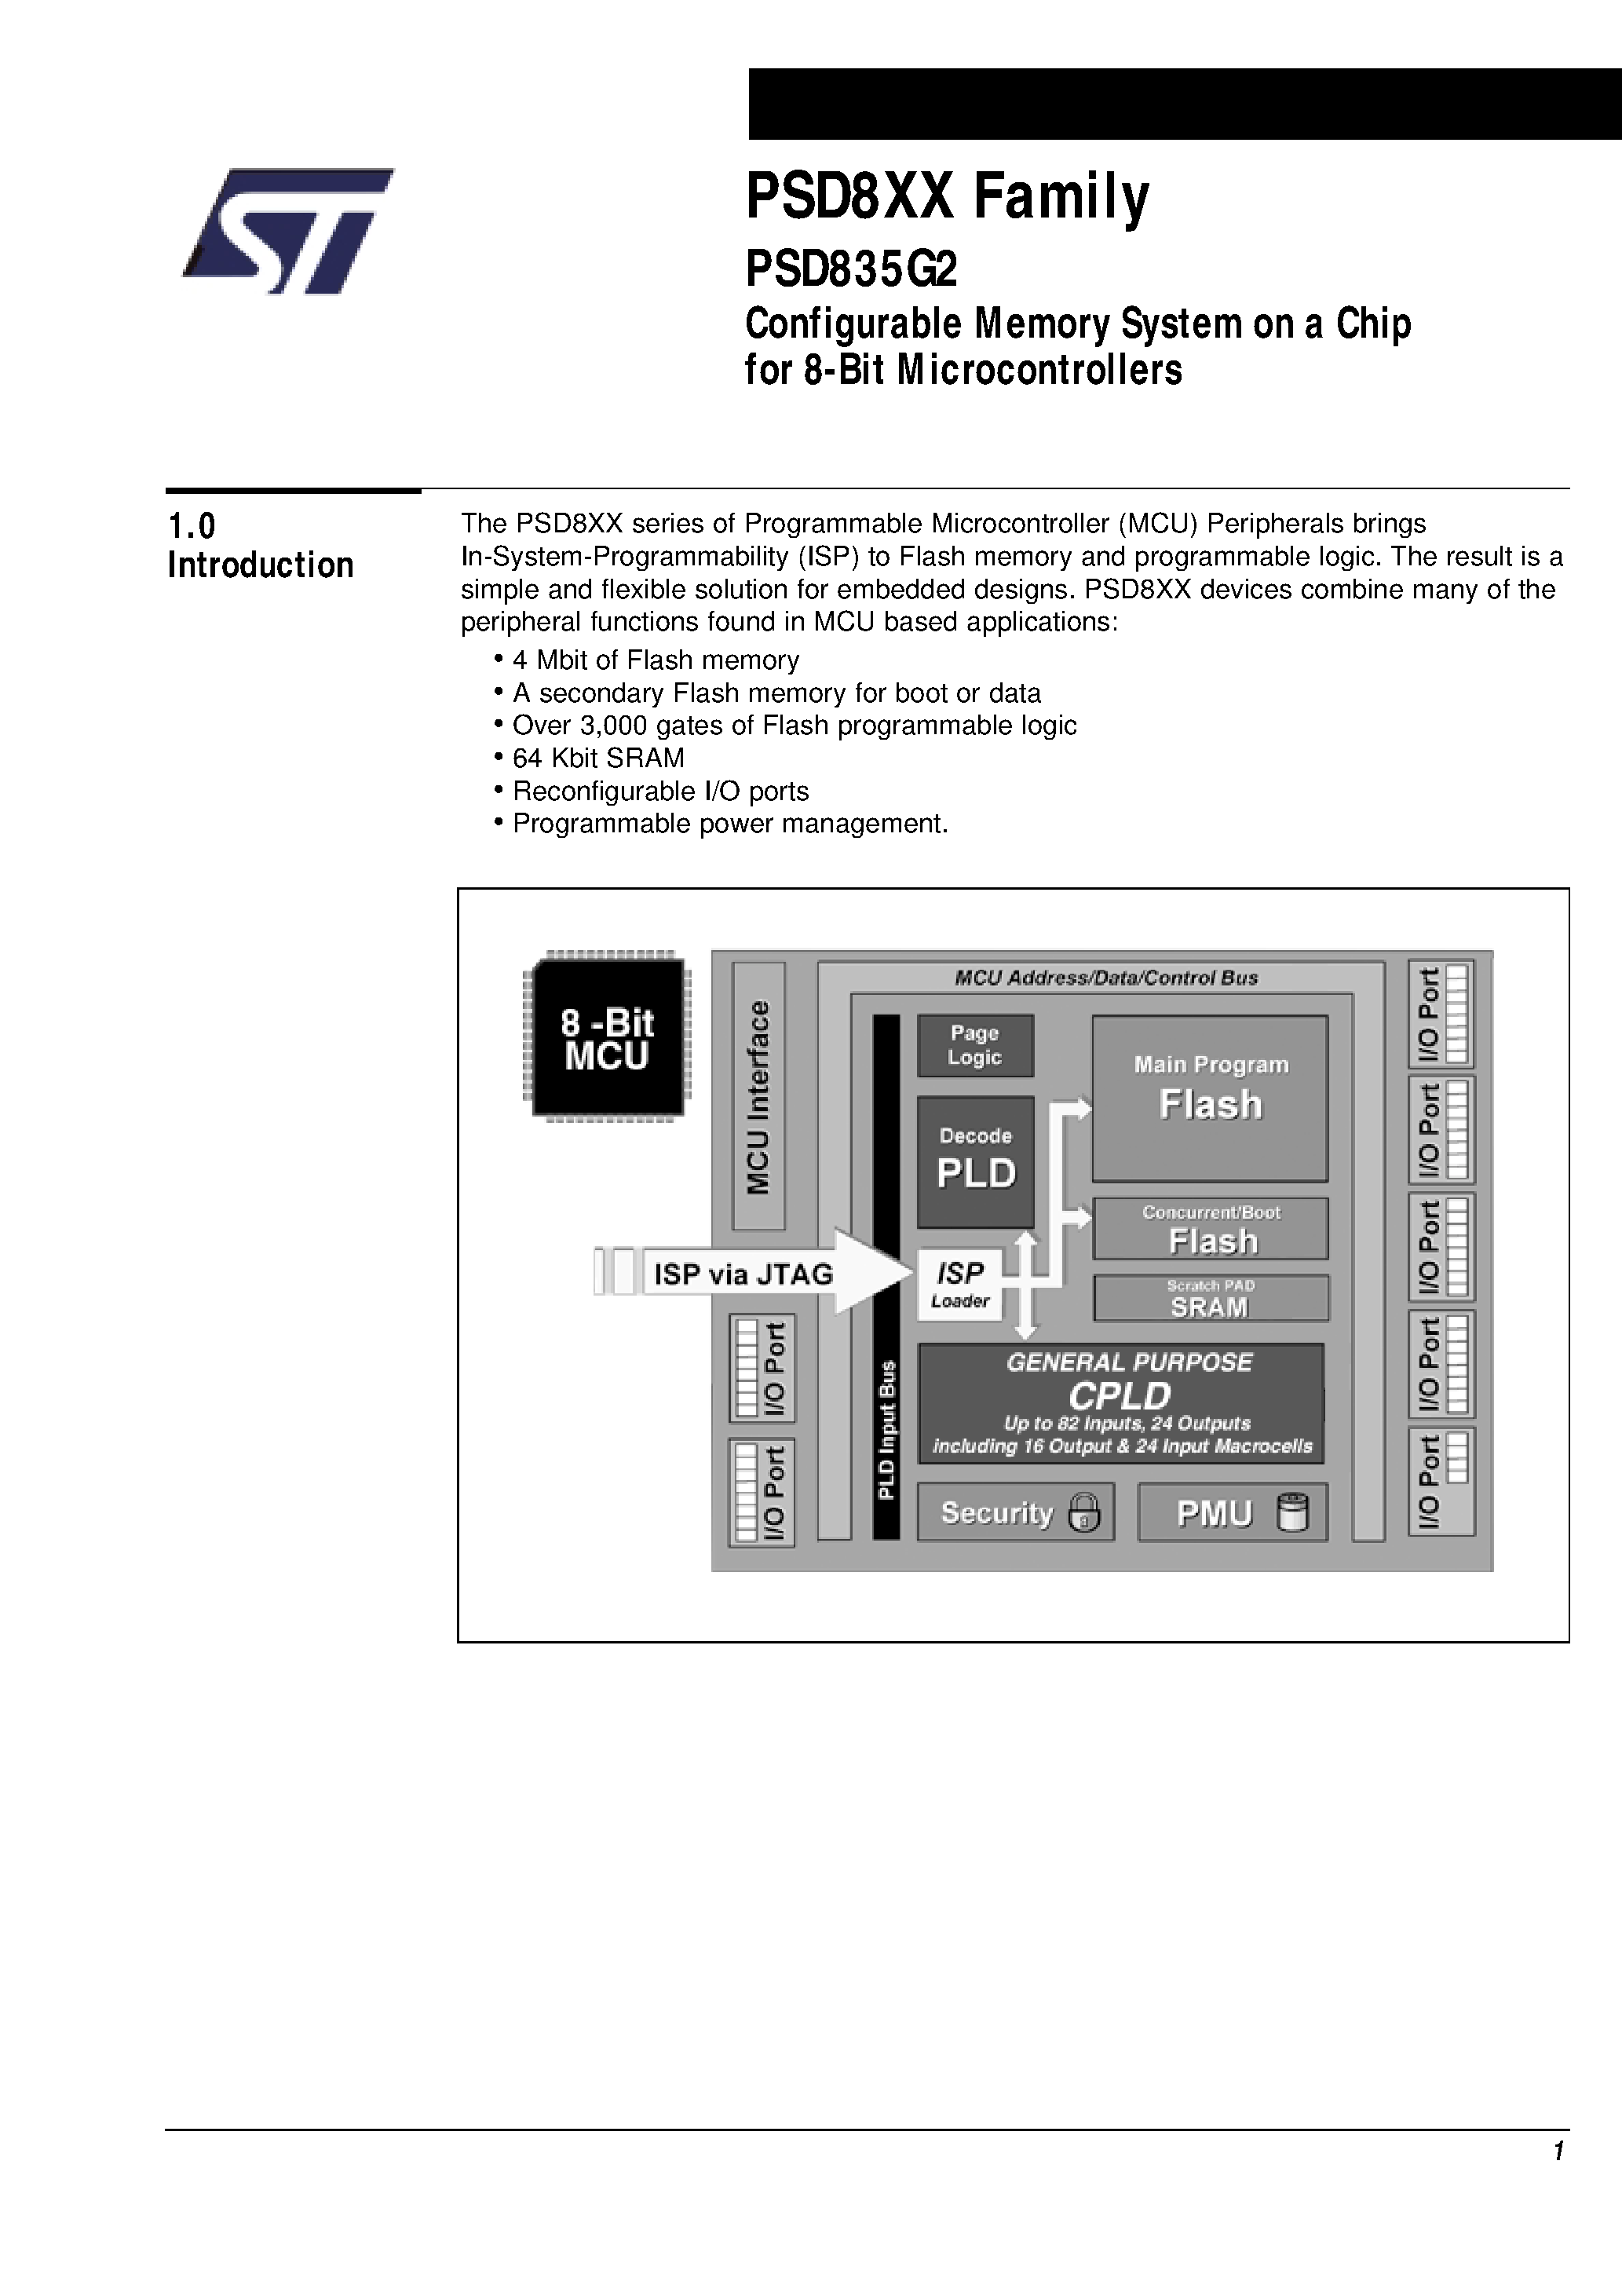 Datasheet PSD835F1V-A-90B81I - Configurable Memory System on a Chip for 8-Bit Microcontrollers page 2